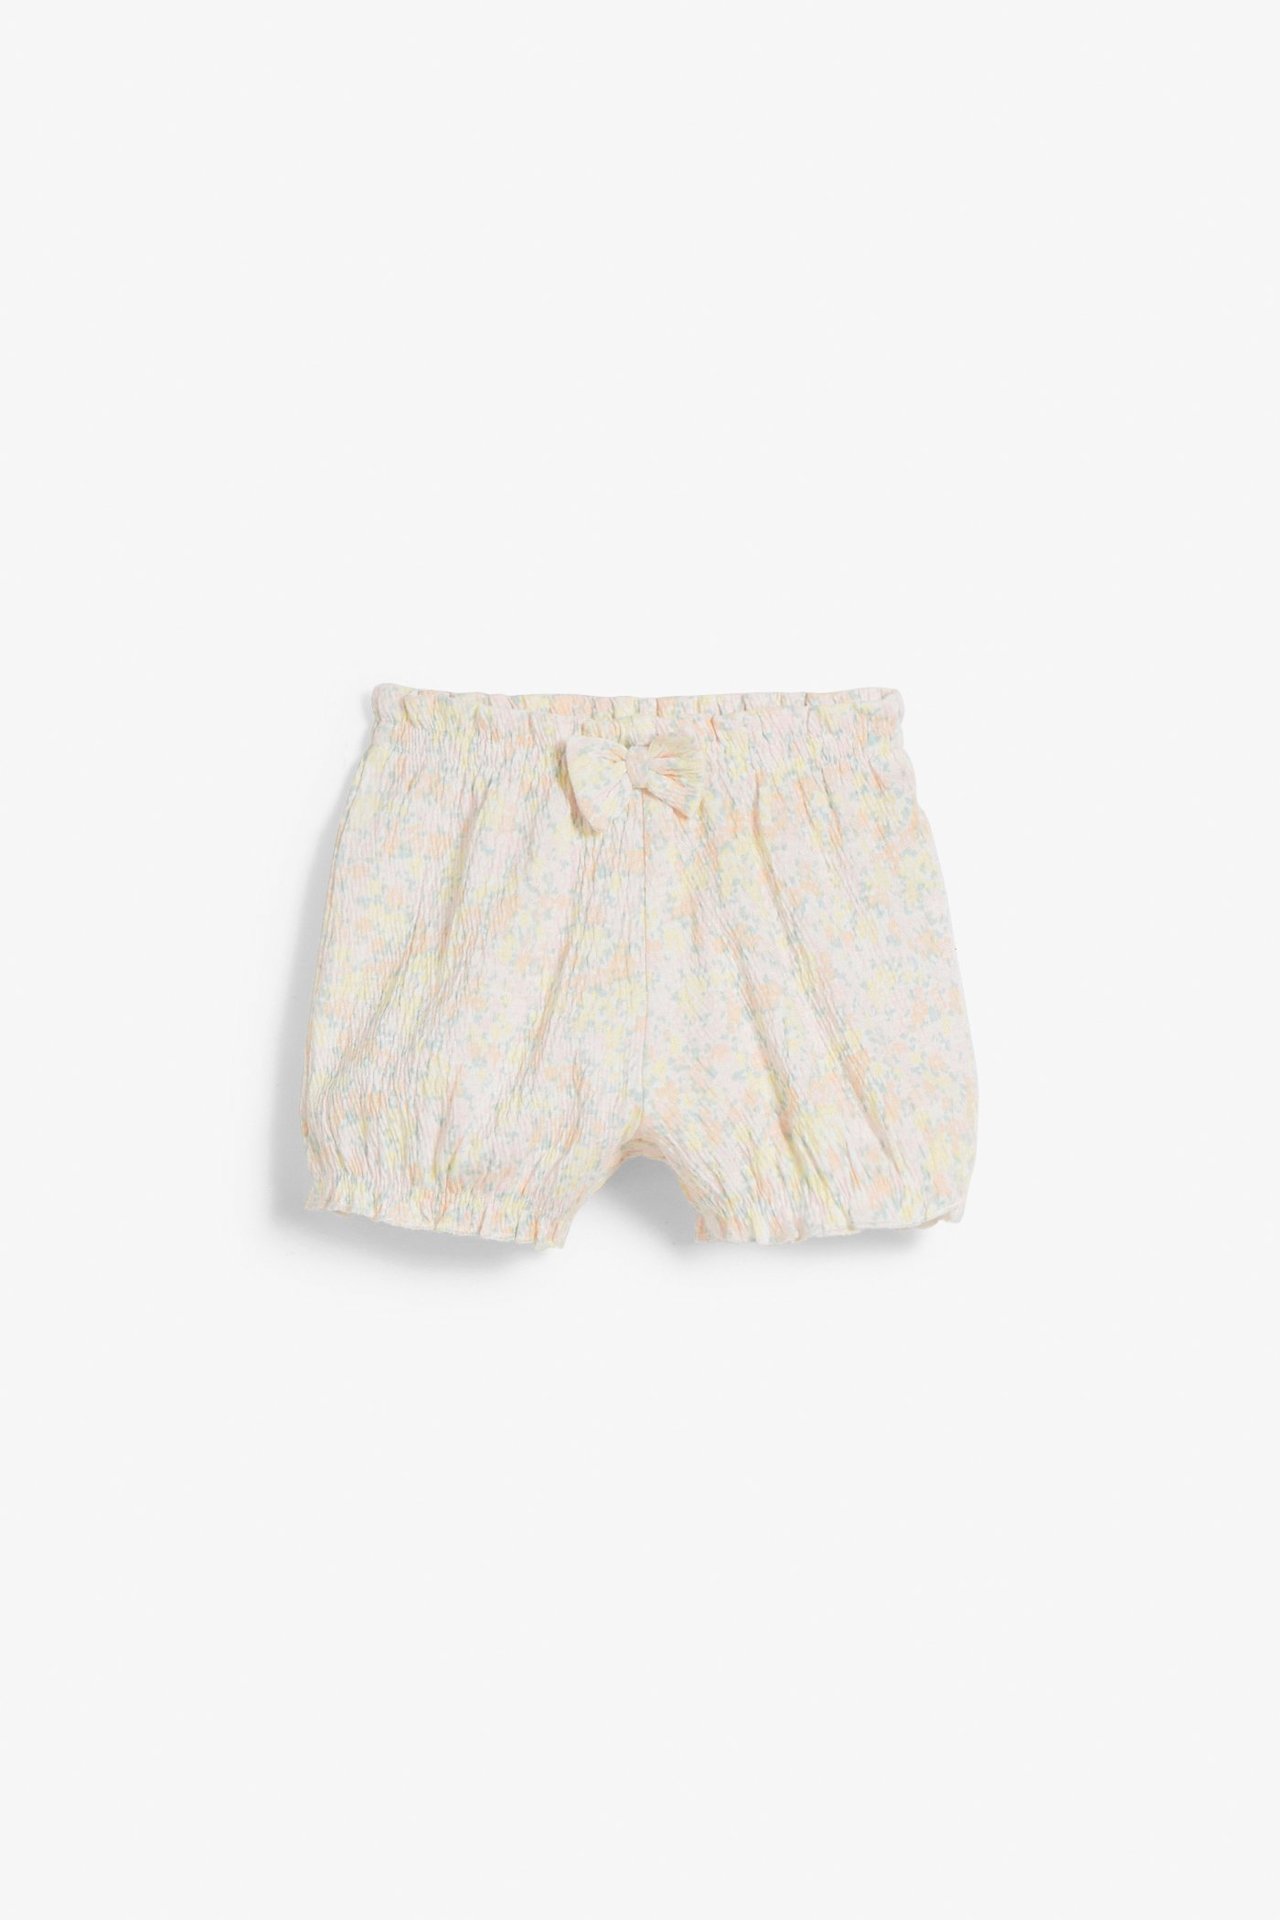 Puffshorts baby